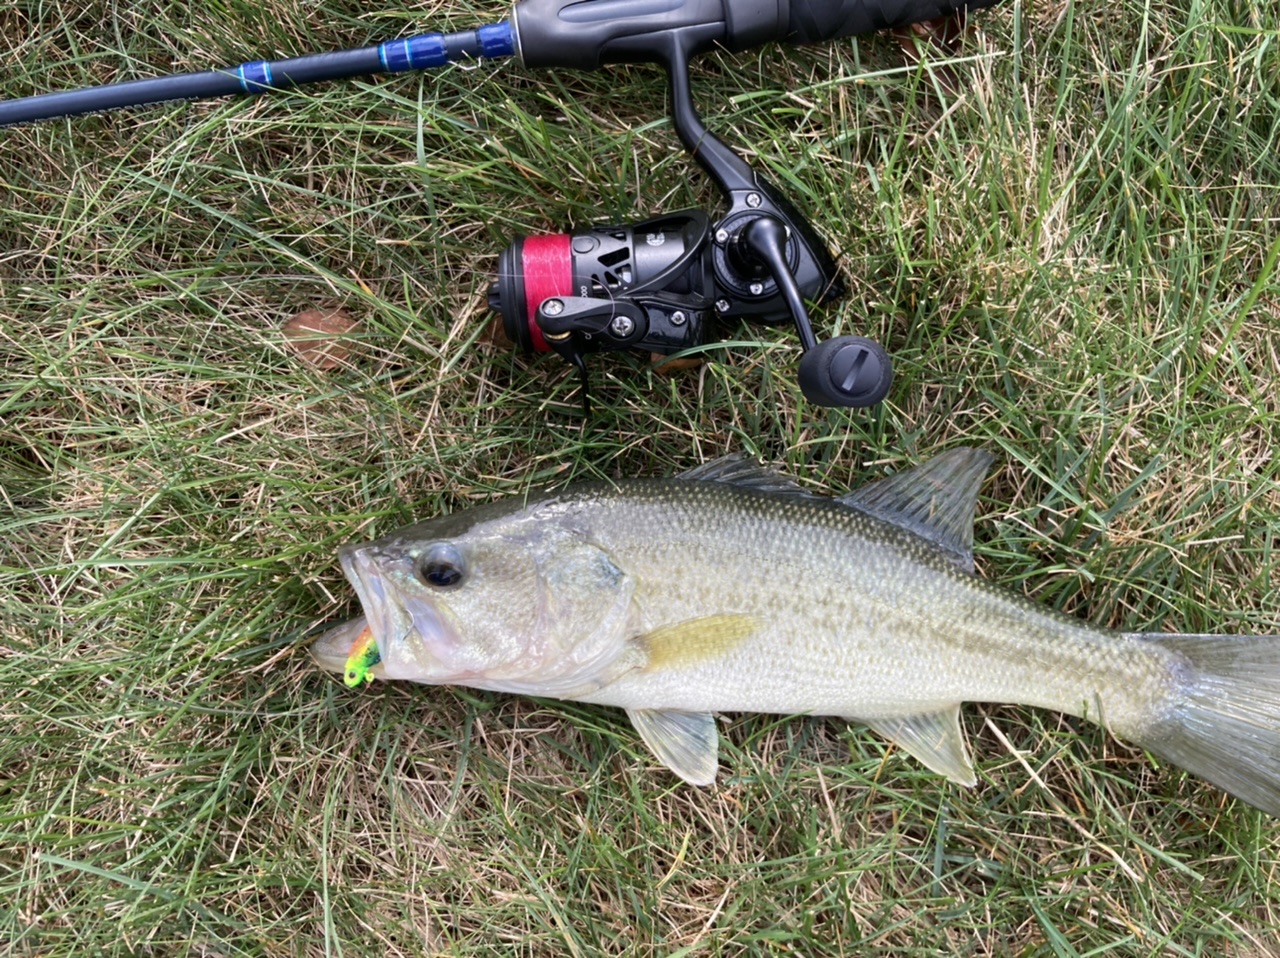 How should I set up my rods for bass fishing and maybe some crappie/bluegill?  : r/FishingForBeginners